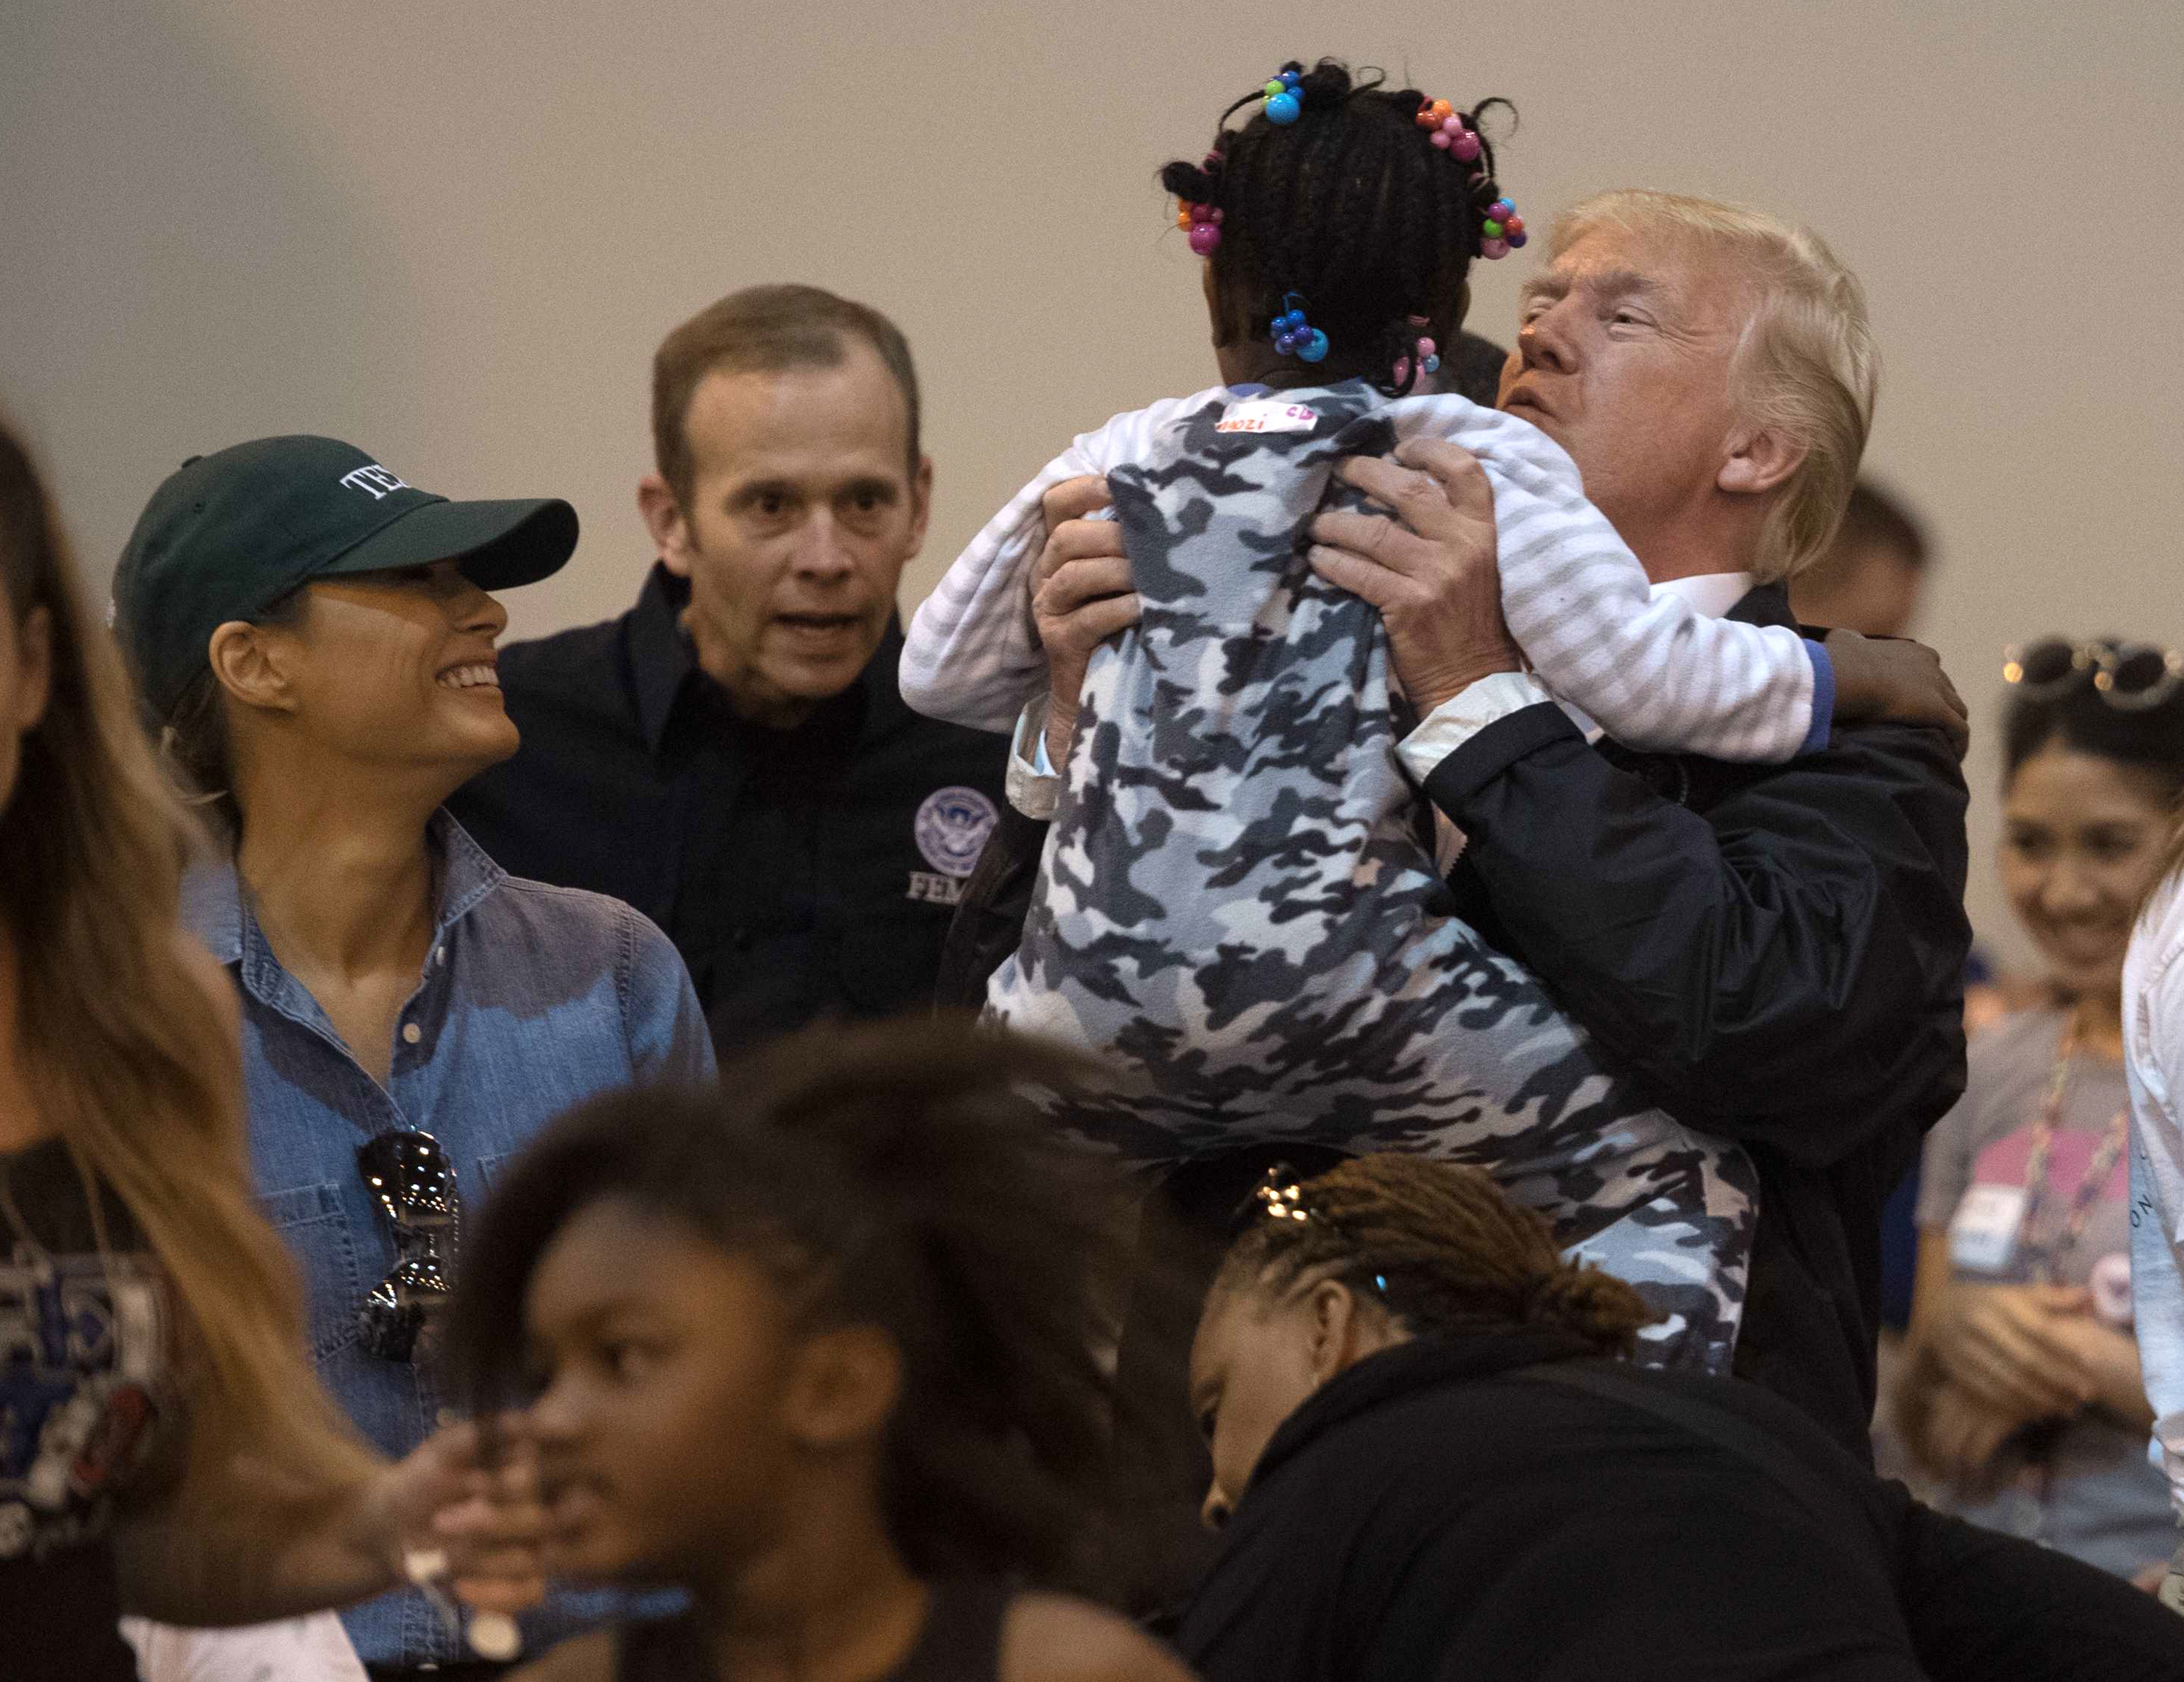 US President Donald Trump and First Lady Melania Trump greet a young Hurricane Harvey victim at NRG Center in Houston on September 2, 2017. NICHOLAS KAMM/AFP/Getty Images